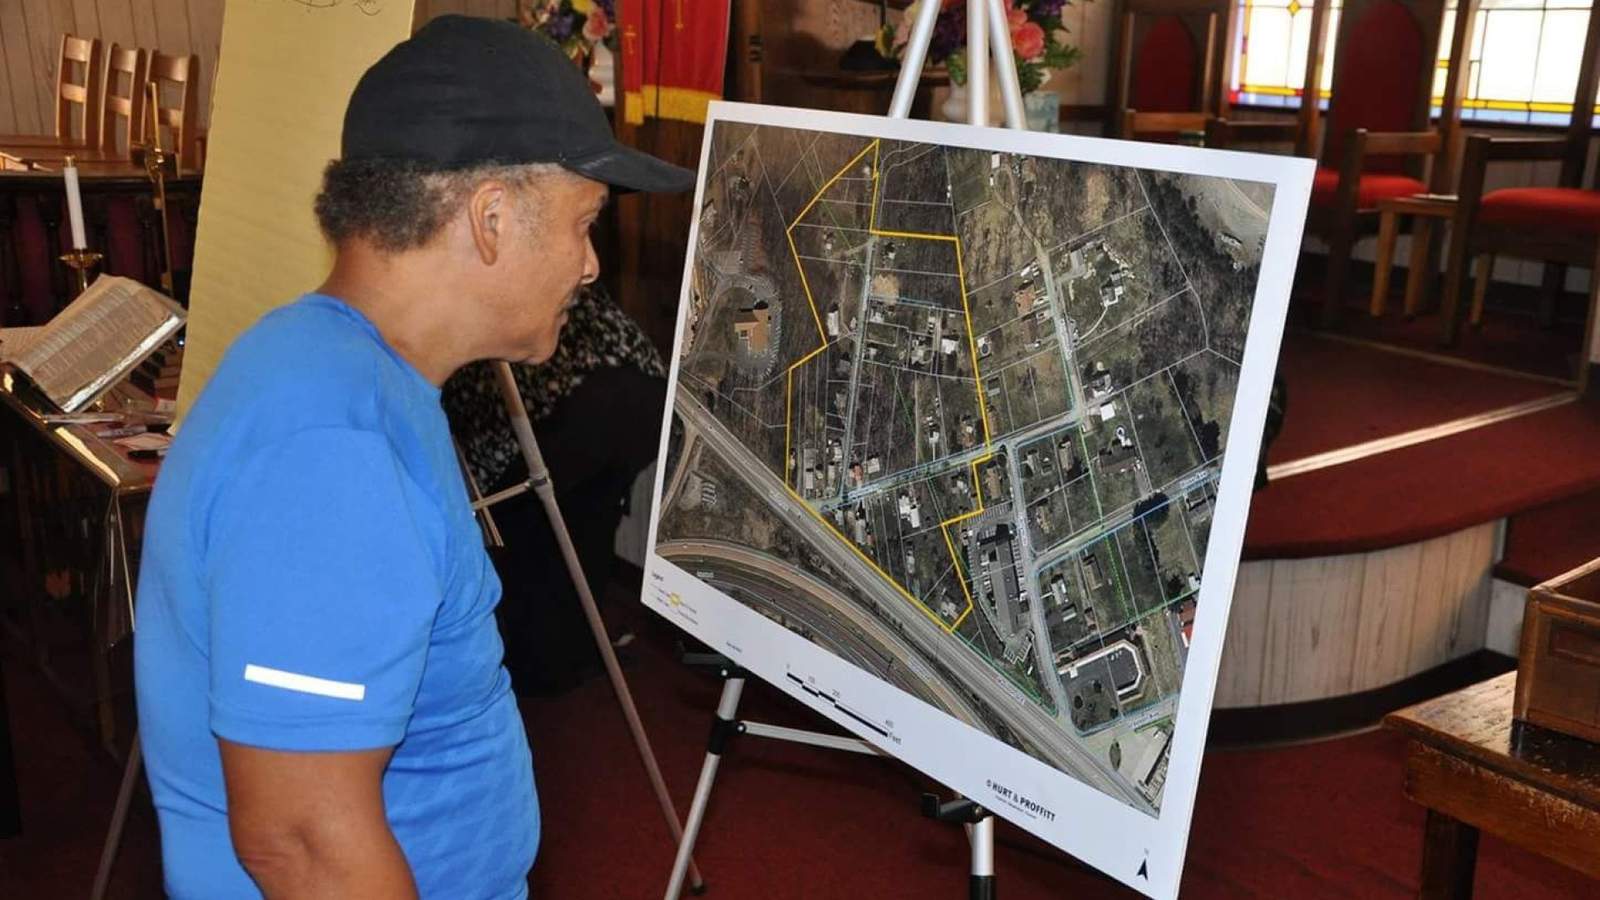 Alleghany County’s only African American neighborhood getting $1.4 million restoration grant